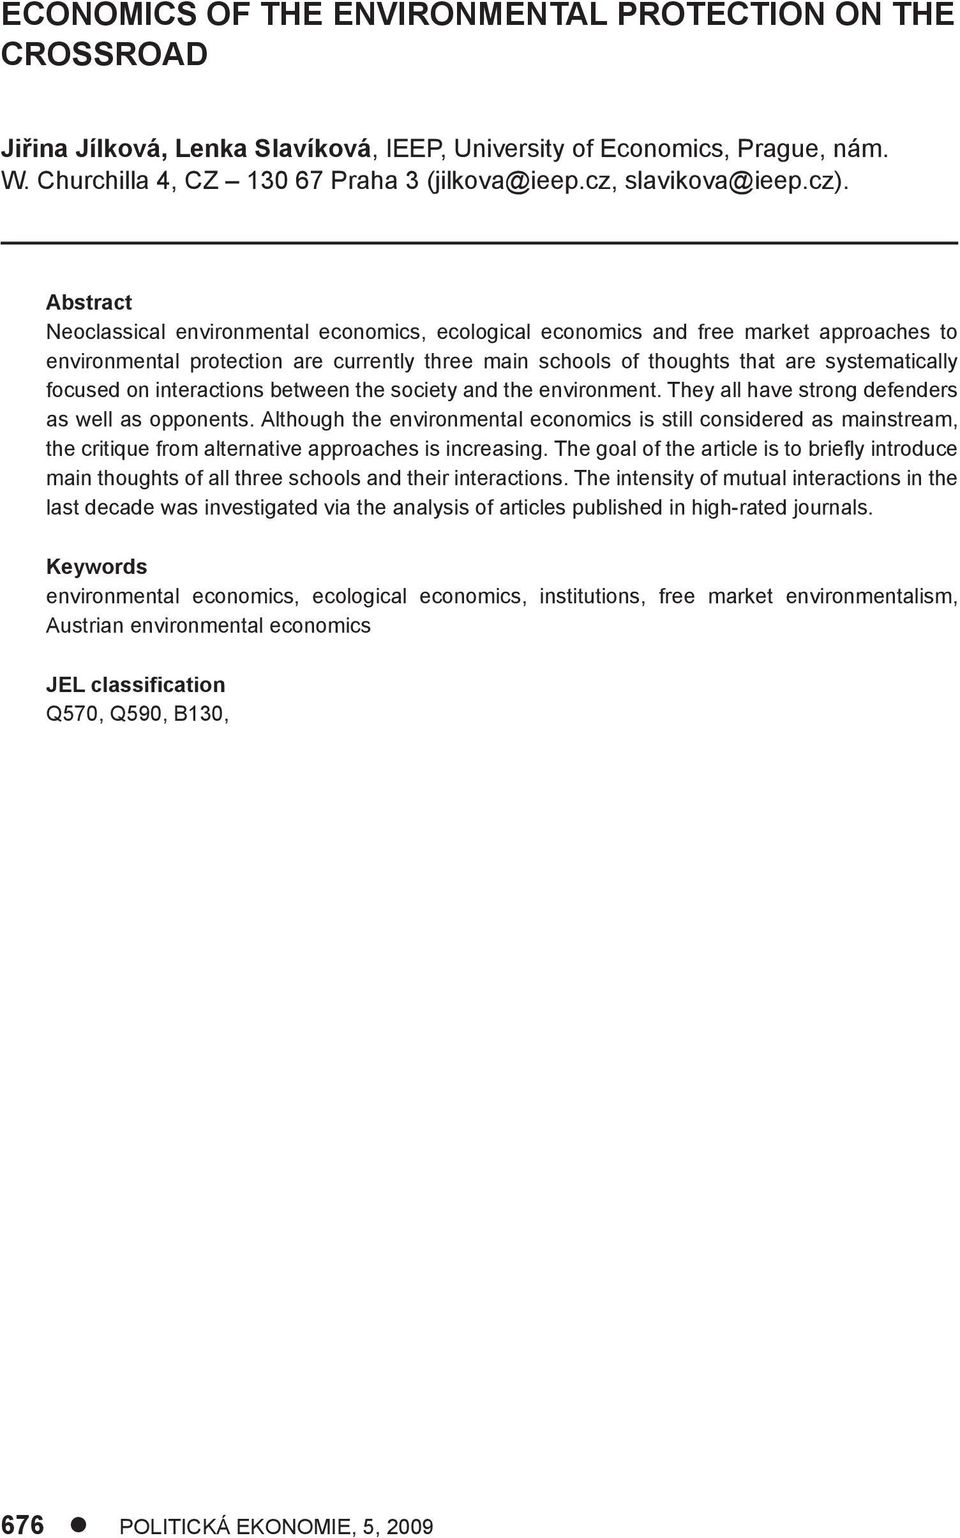 Abstract Neoclassical environmental economics, ecological economics and free market approaches to environmental protection are currently three main schools of thoughts that are systematically focused